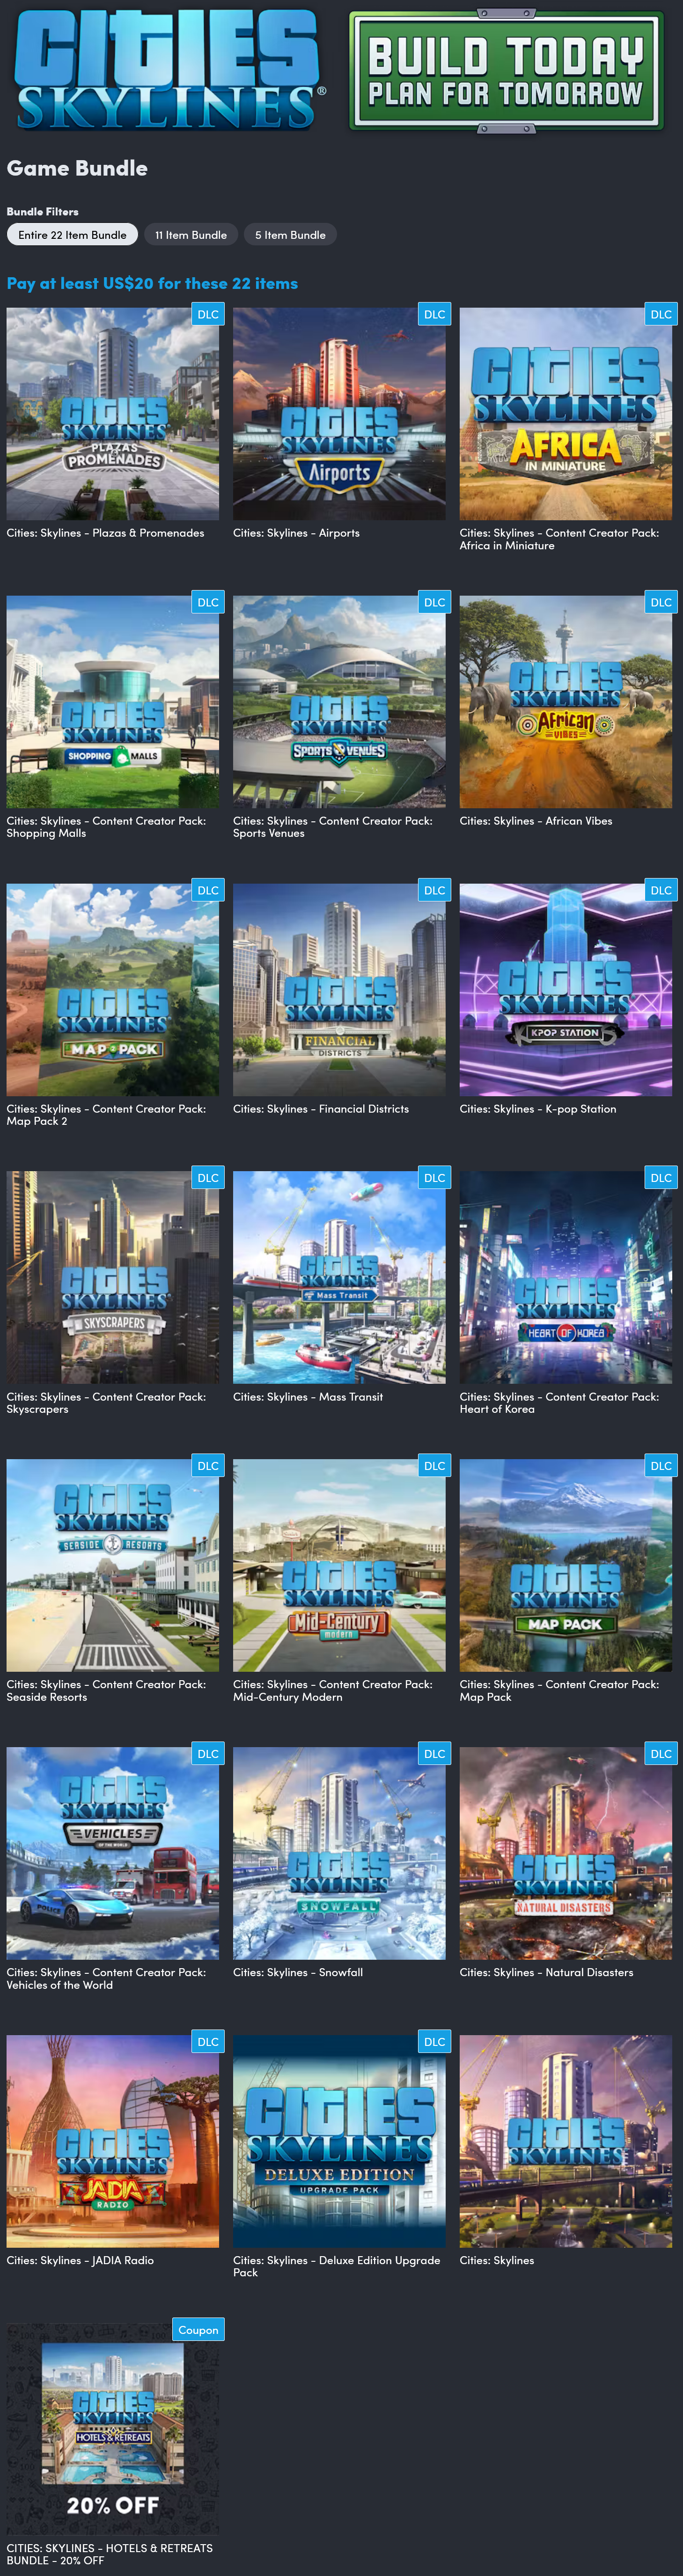 Screenshot 2023-09-14 at 13-02-09 Cities Skylines Complete Your Collection.png